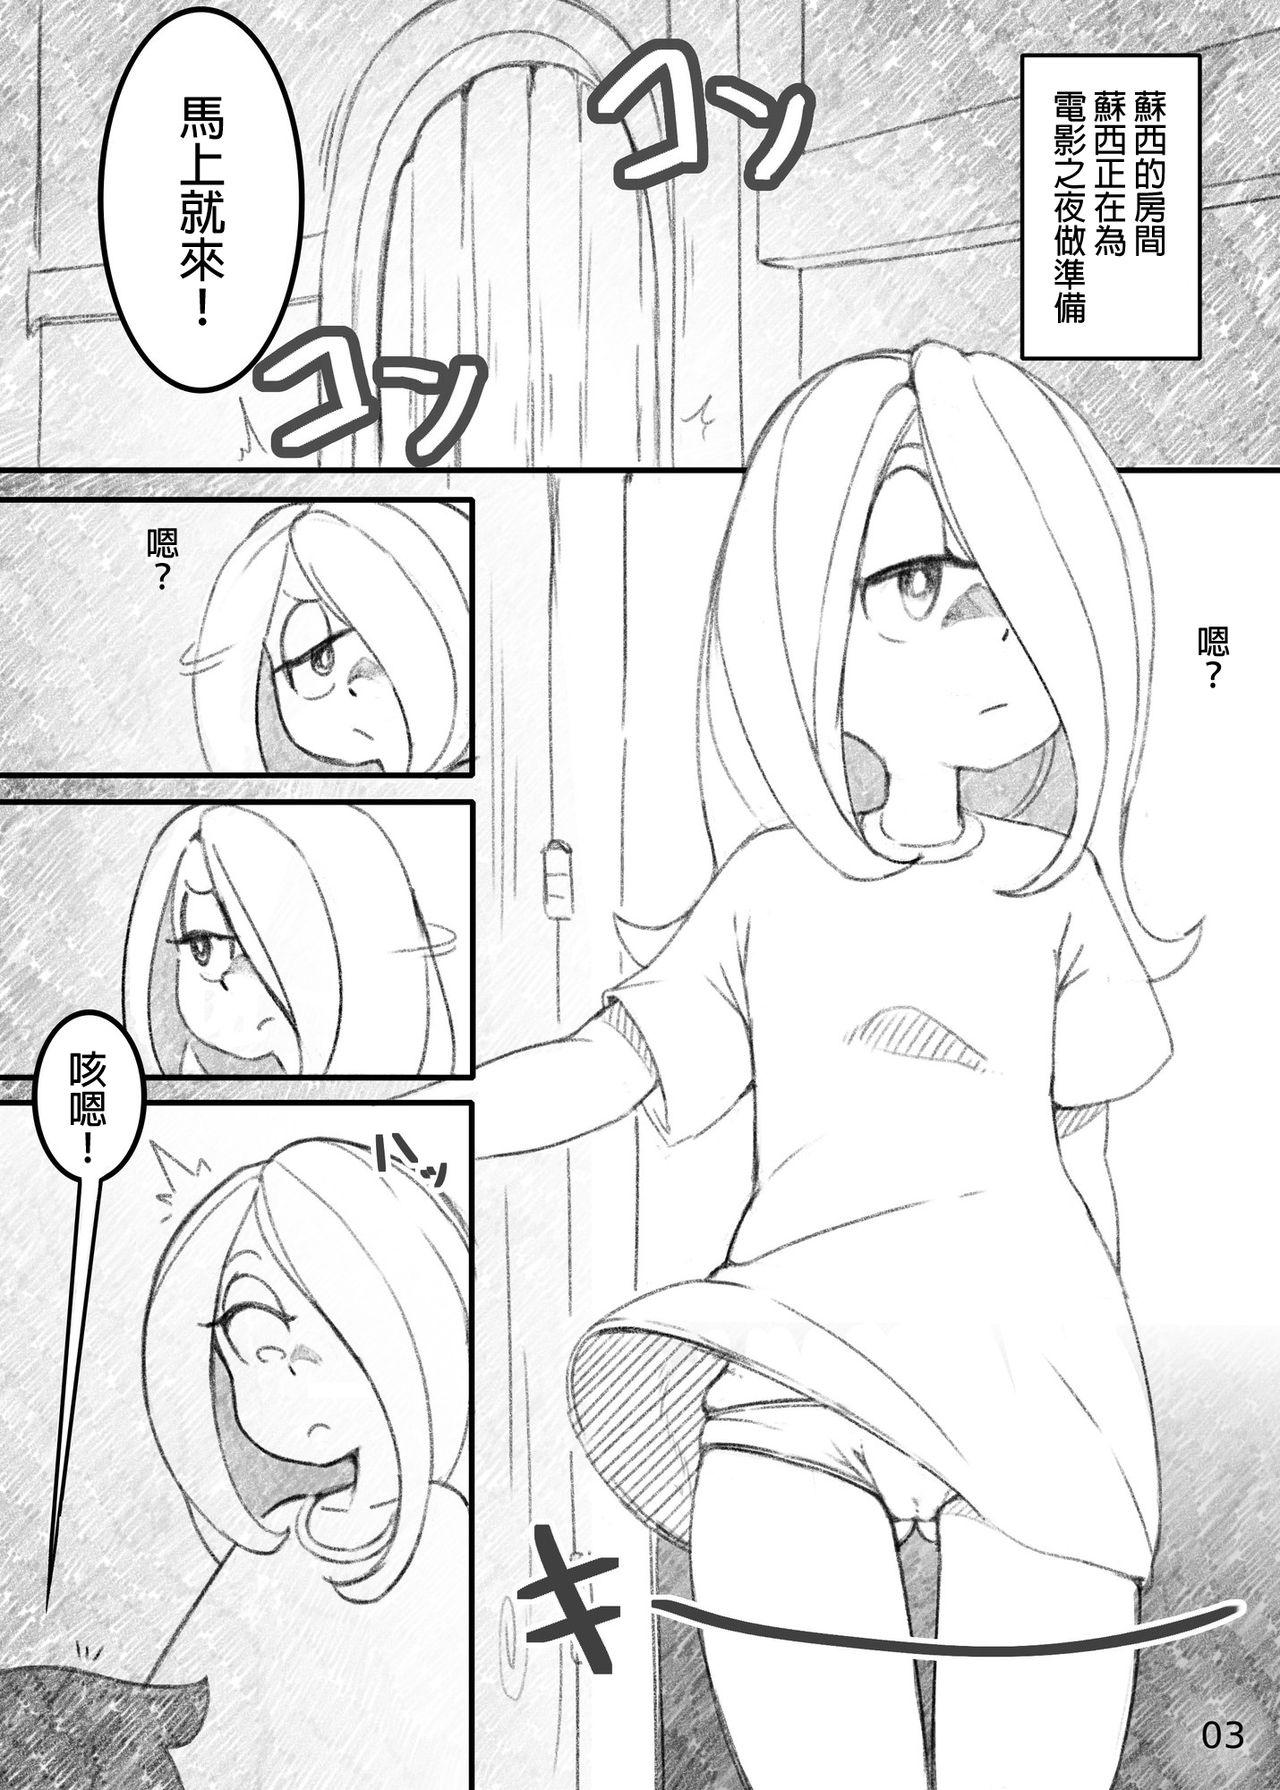 Rola Movie Night - Little witch academia Fuck - Page 3